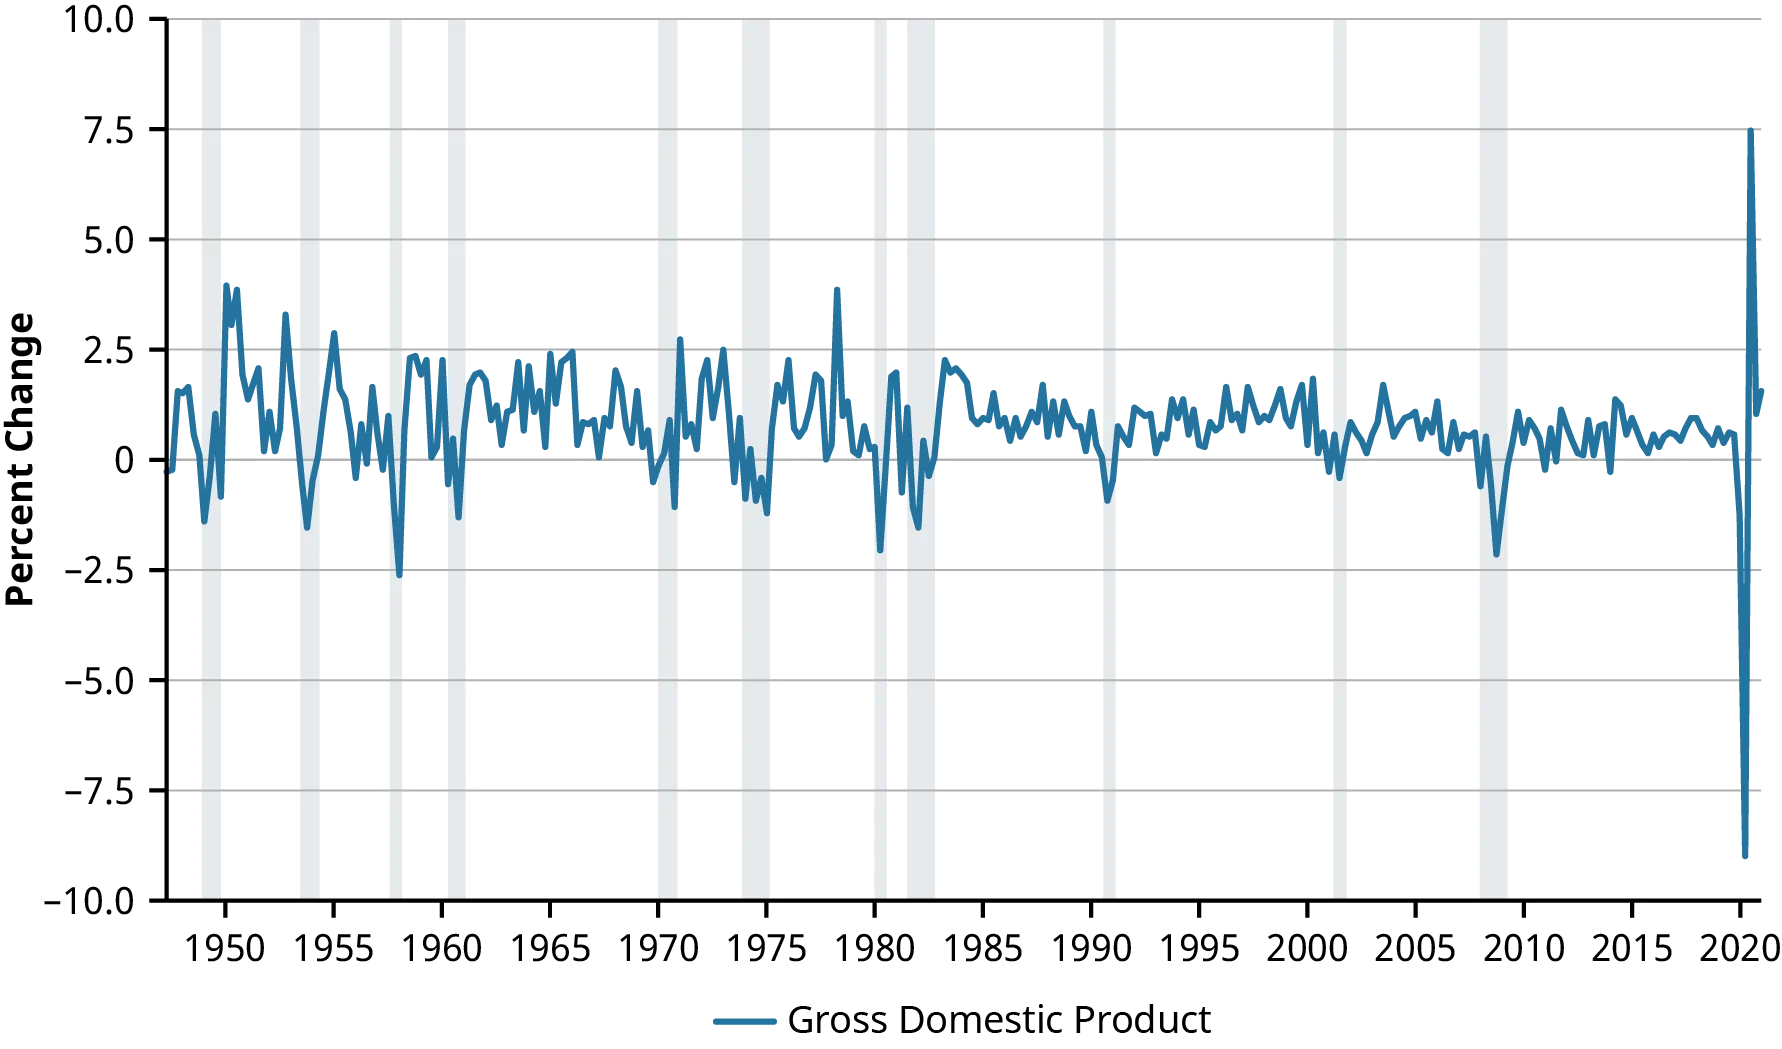 A line graph shows the Quarterly Percentage Change in U.S. Real GDP from 1950 through 2020. Recessions are shown by shading in the graph and have occurred 11 times. During all recessions, there is a negative percent change in real GDP. 2020 shows the largest decrease in real GDP, at almost negative 10%, although no recession is indicated. This is quickly followed by the largest increase in real GDP, at 7.5% increase.